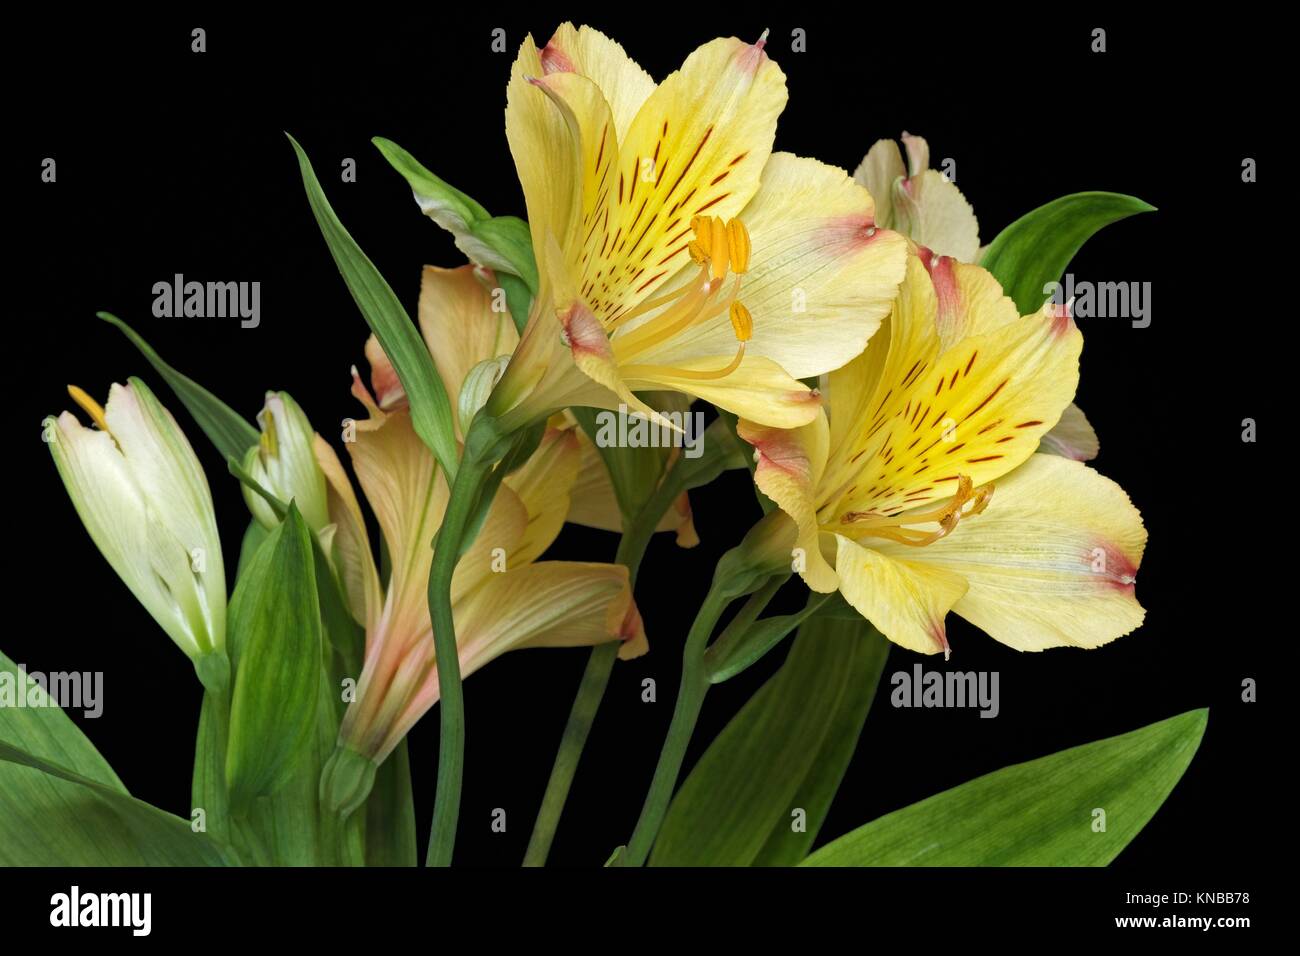 Peruvian lily (Alstroemeria x hybrid). Called Lily of the Incas also. Image of flowers on black background. Stock Photo